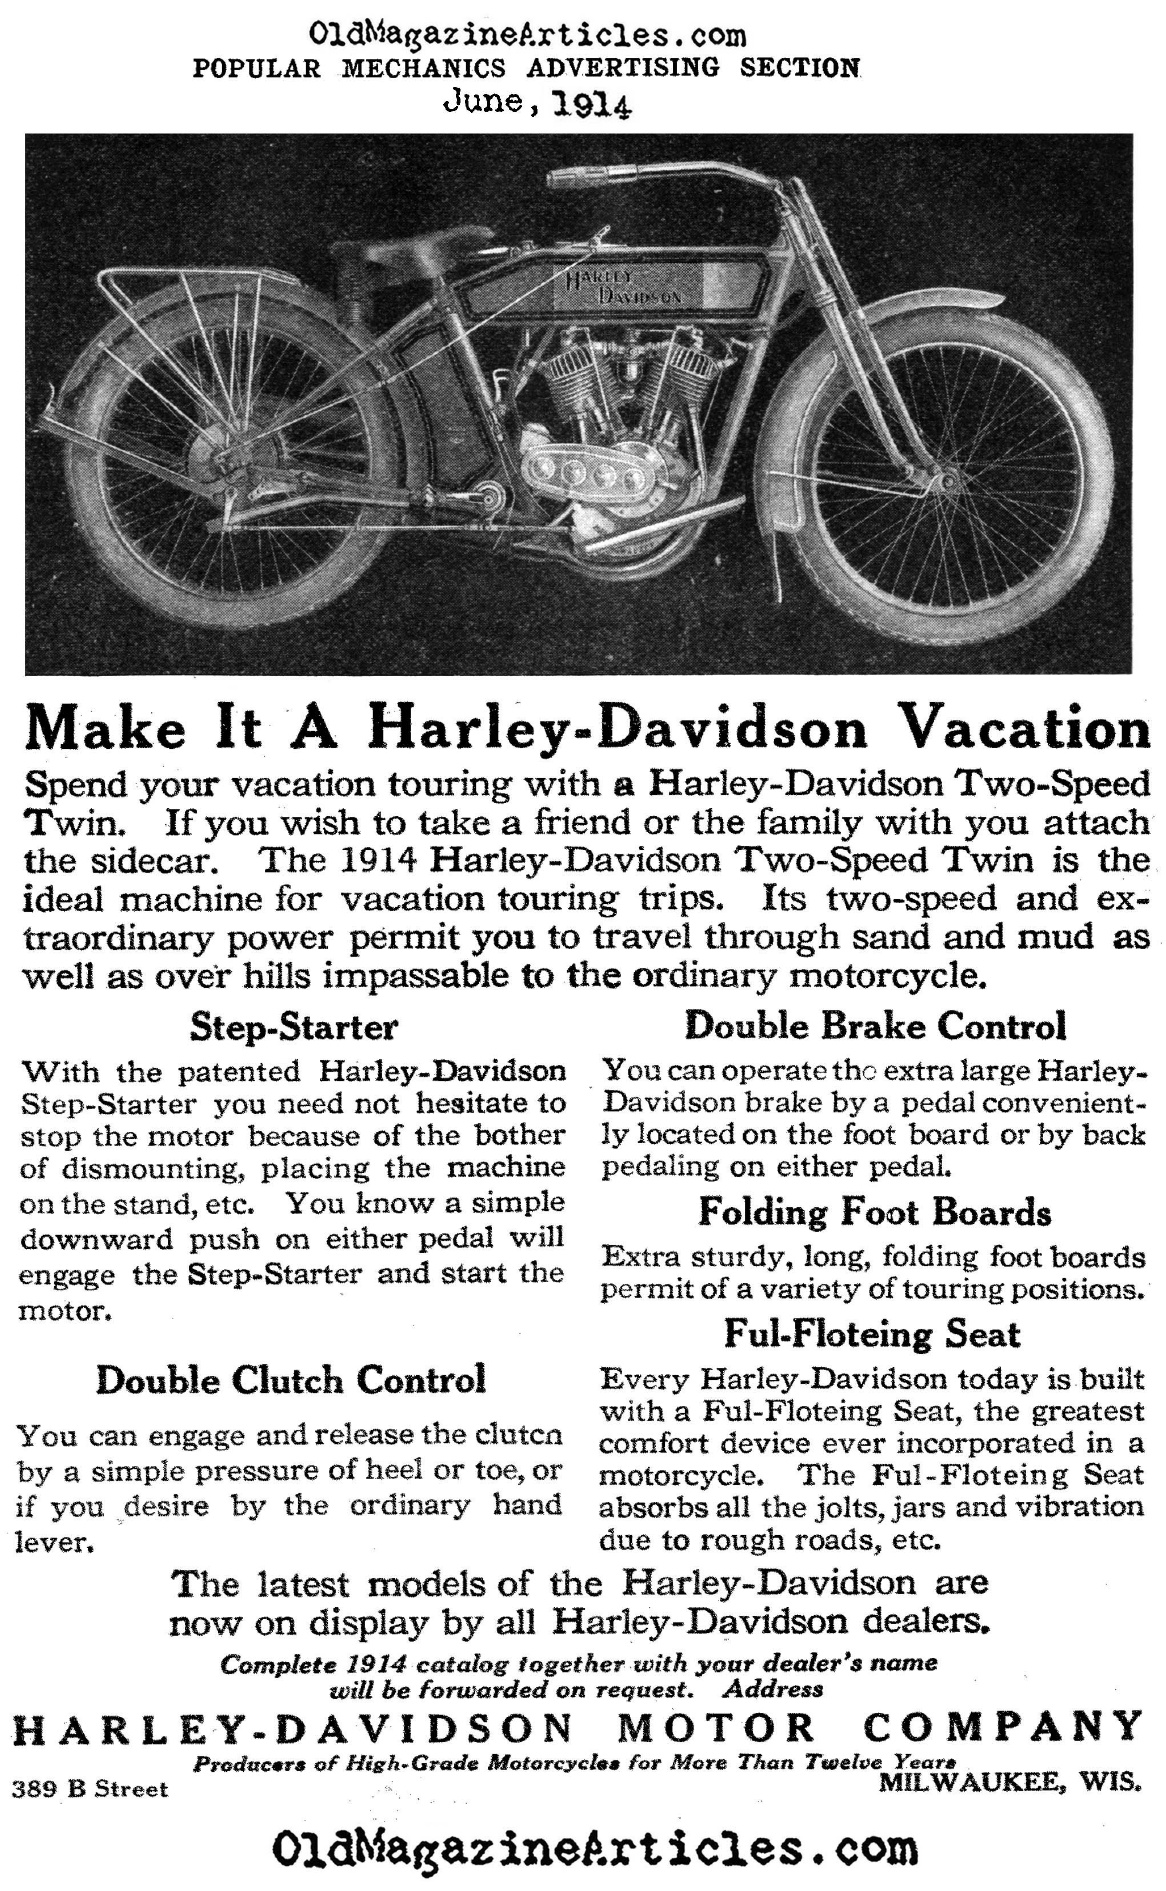 A New Kind of Motorcycle (Magazine Advertisement, 1914)